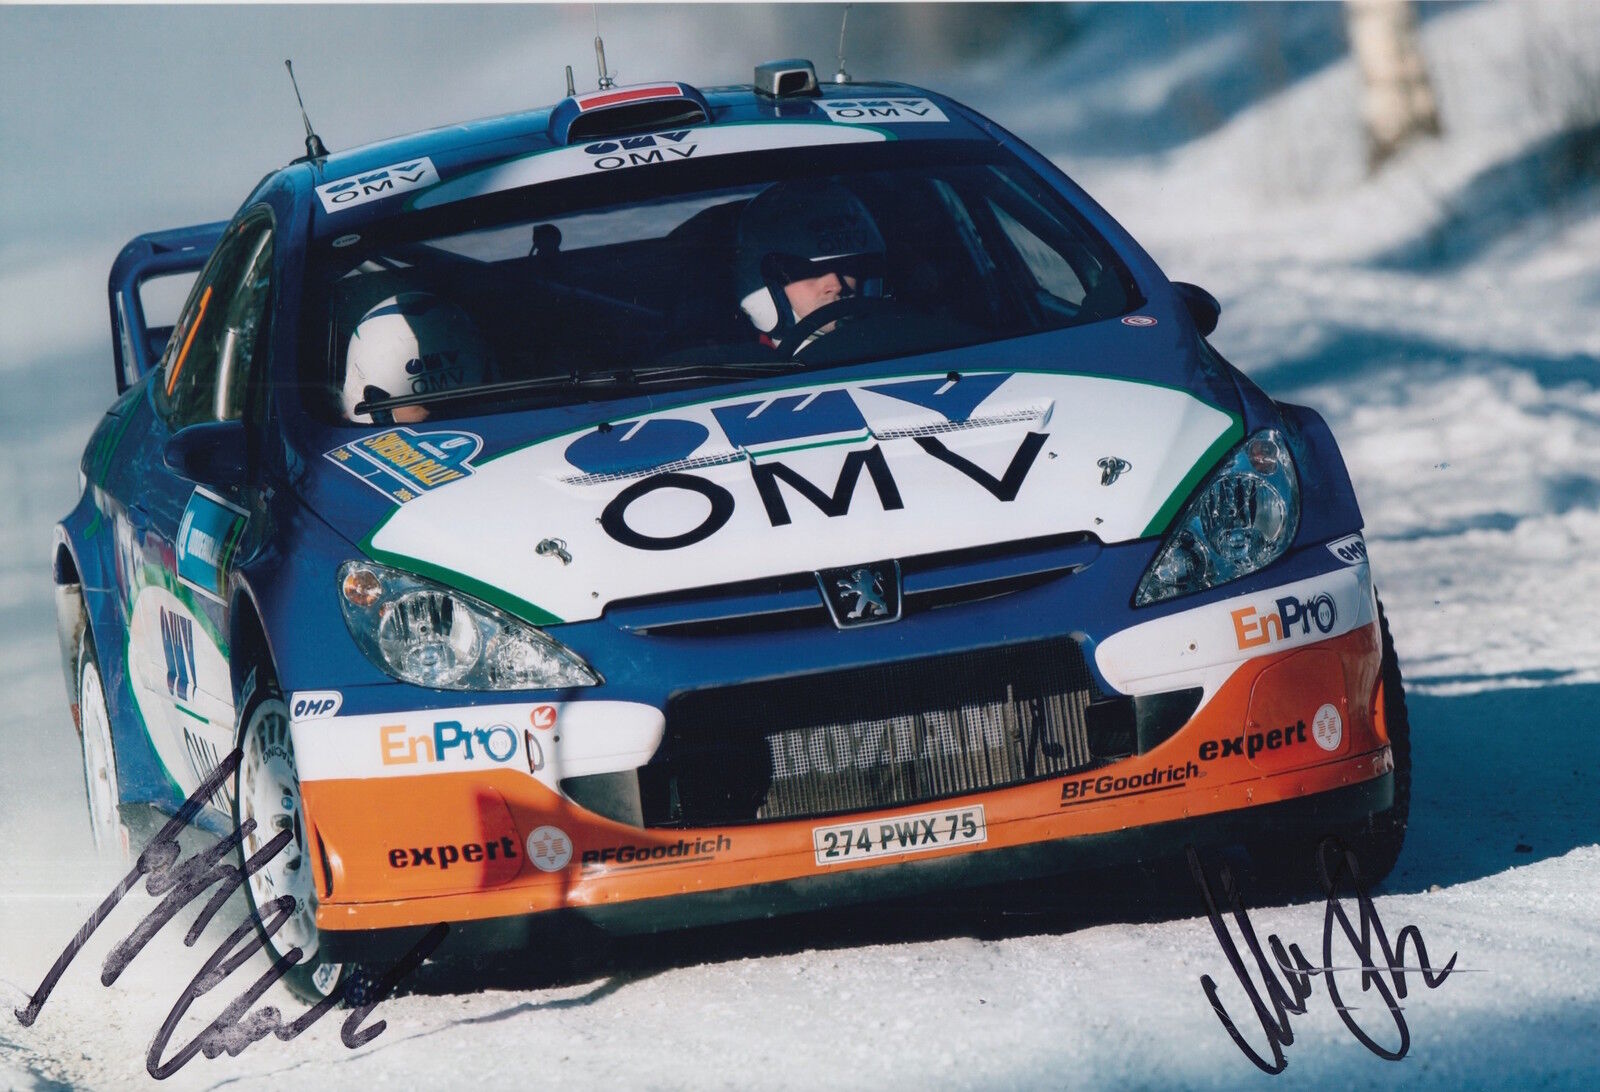 Manfred Stohl and Ilka Minor Hand Signed 12x8 Photo Poster painting Citroen Xsara Rally 3.